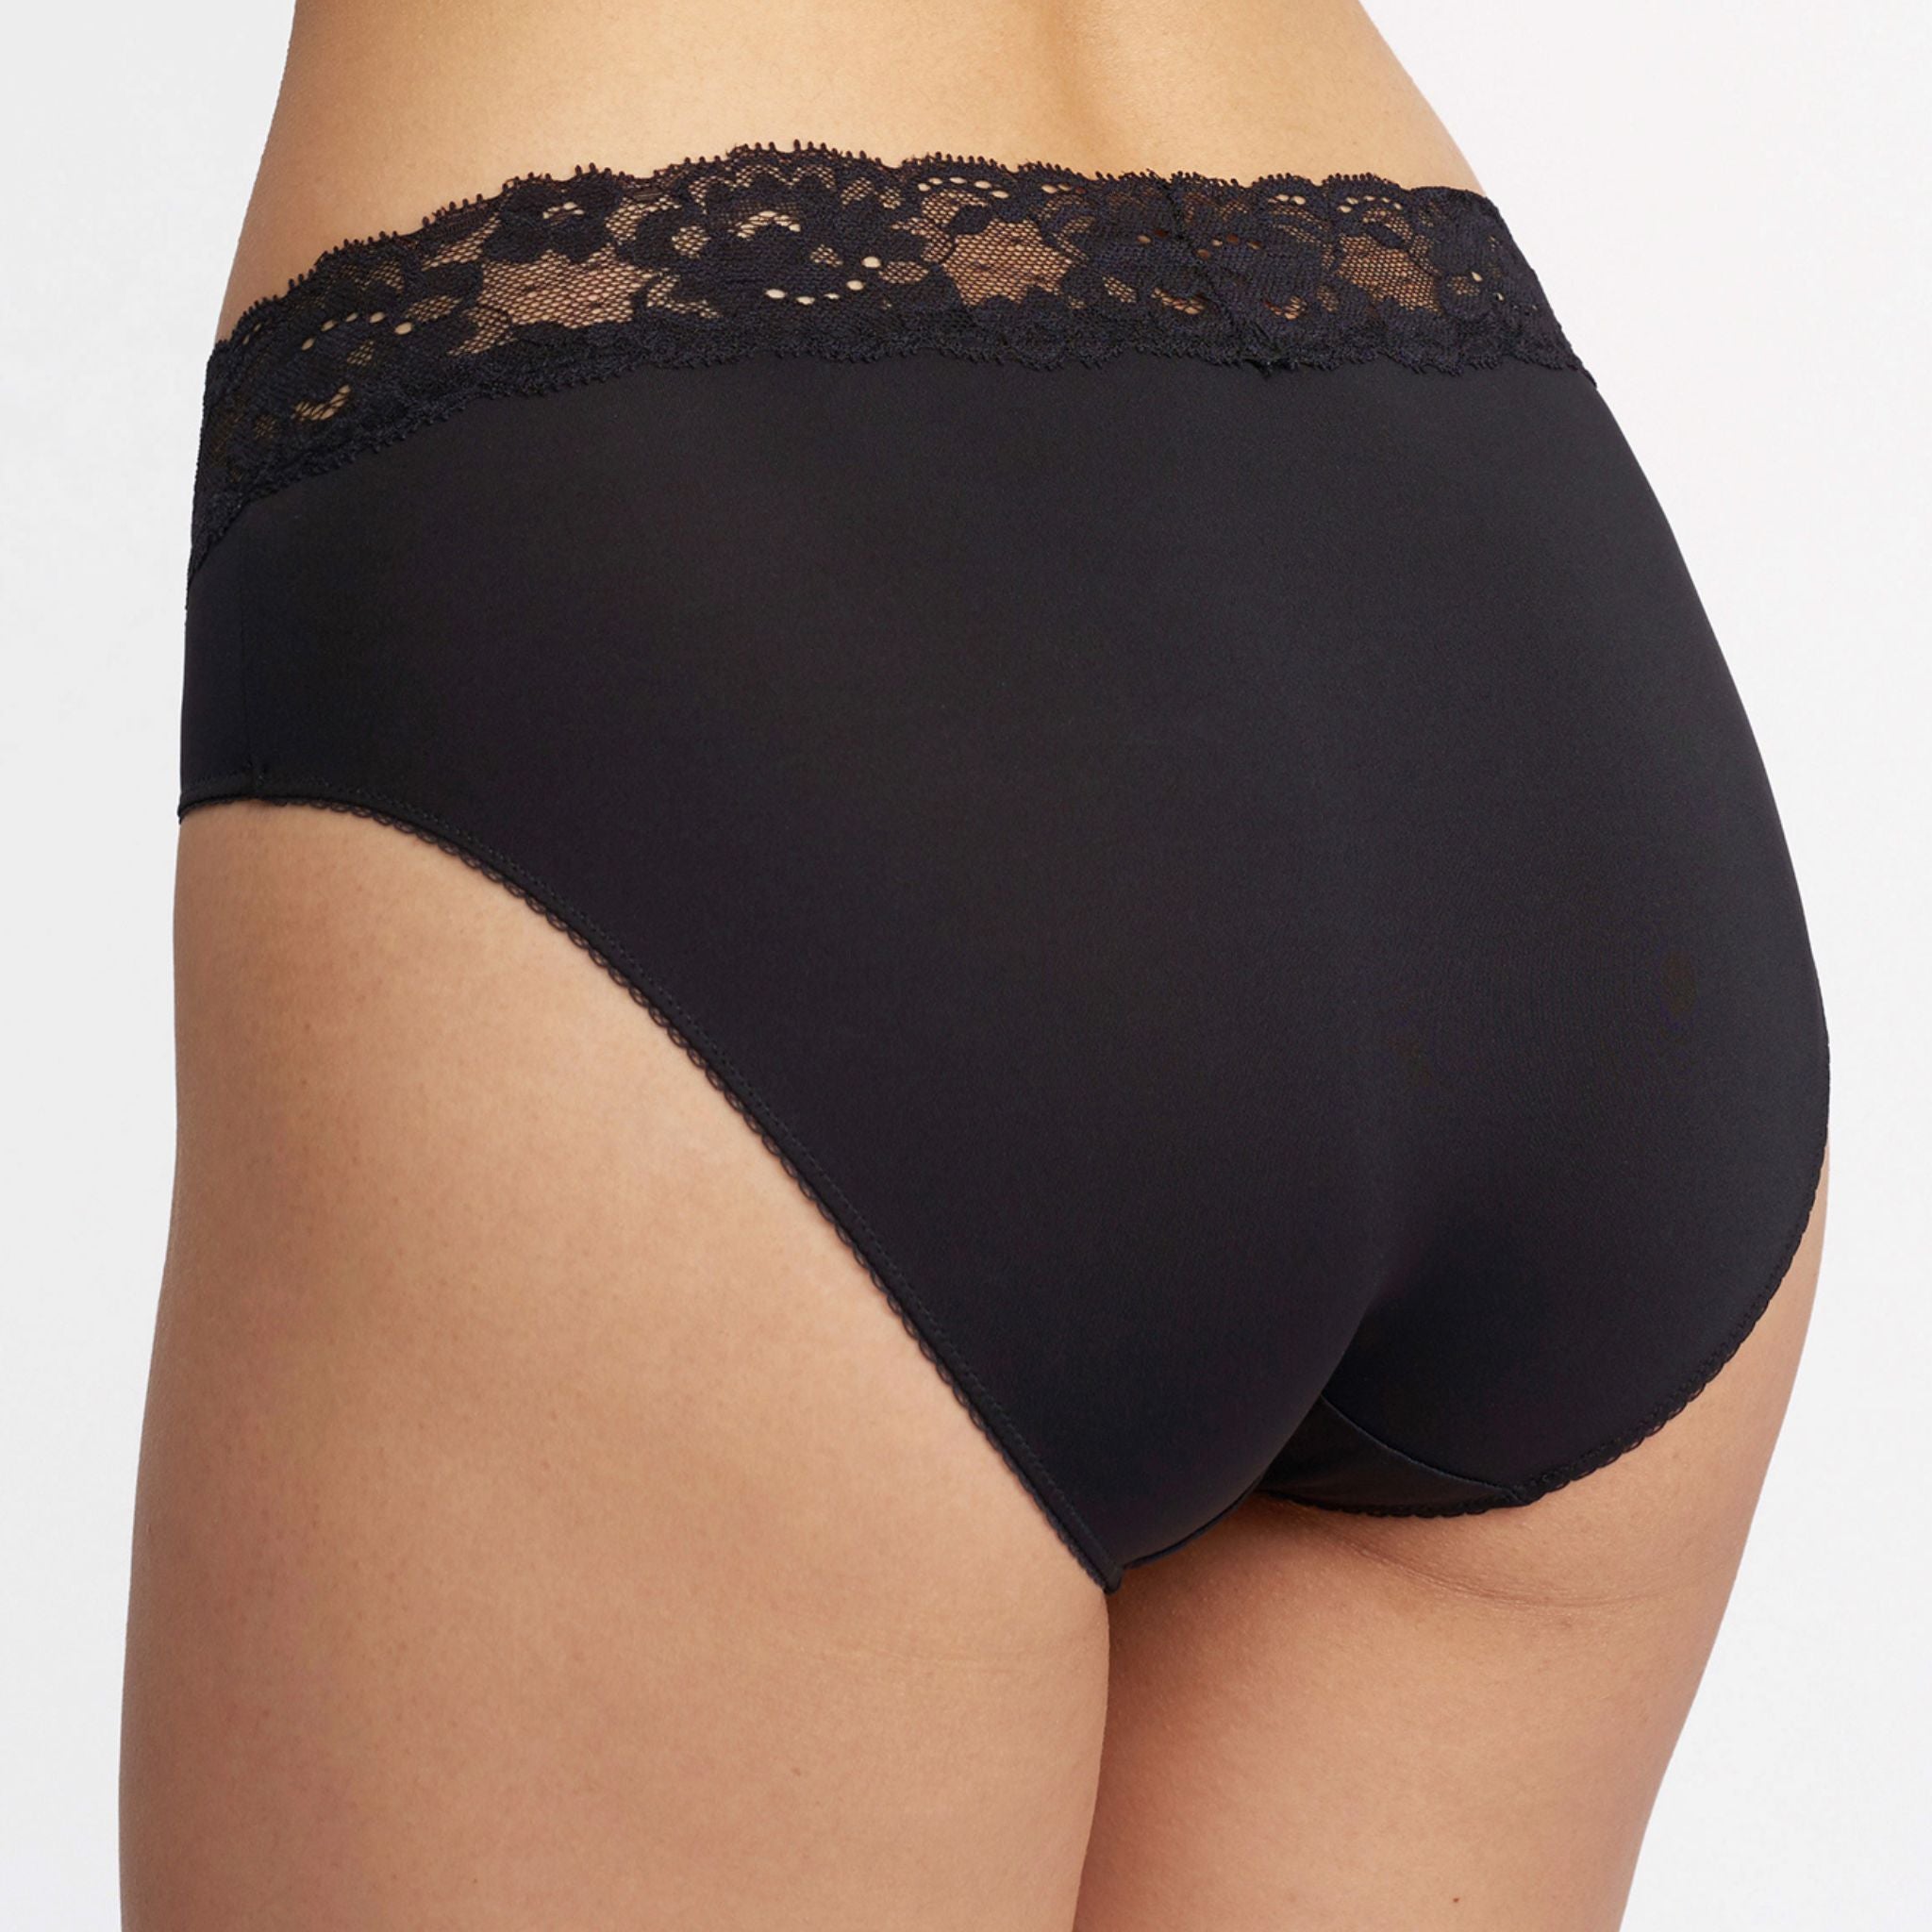 This panty has you covered! Made with ultra-soft, lightweight microfiber, the Brief has full coverage at the back and flat elastic around the legs and at the top for a line-free look.